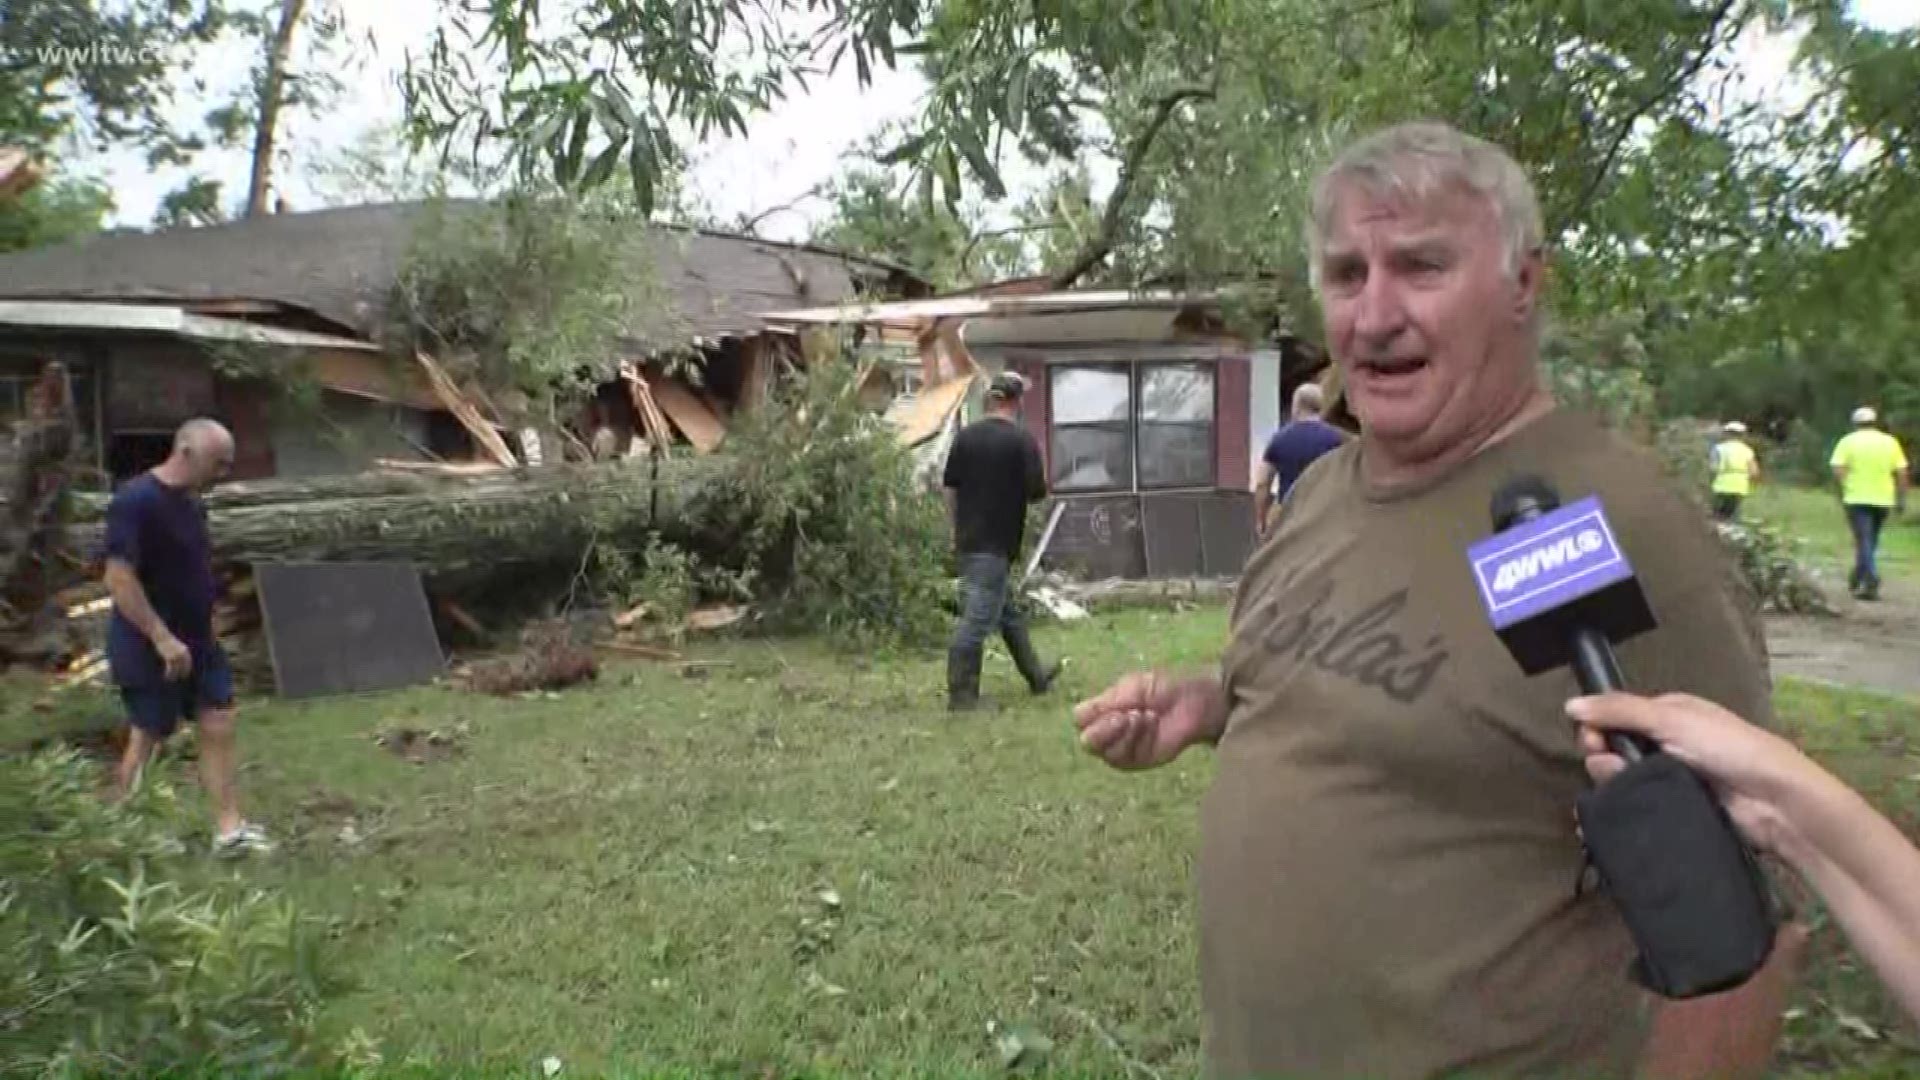 A possible tornado touched down in Galvez, sending trees flying and destroying homes.